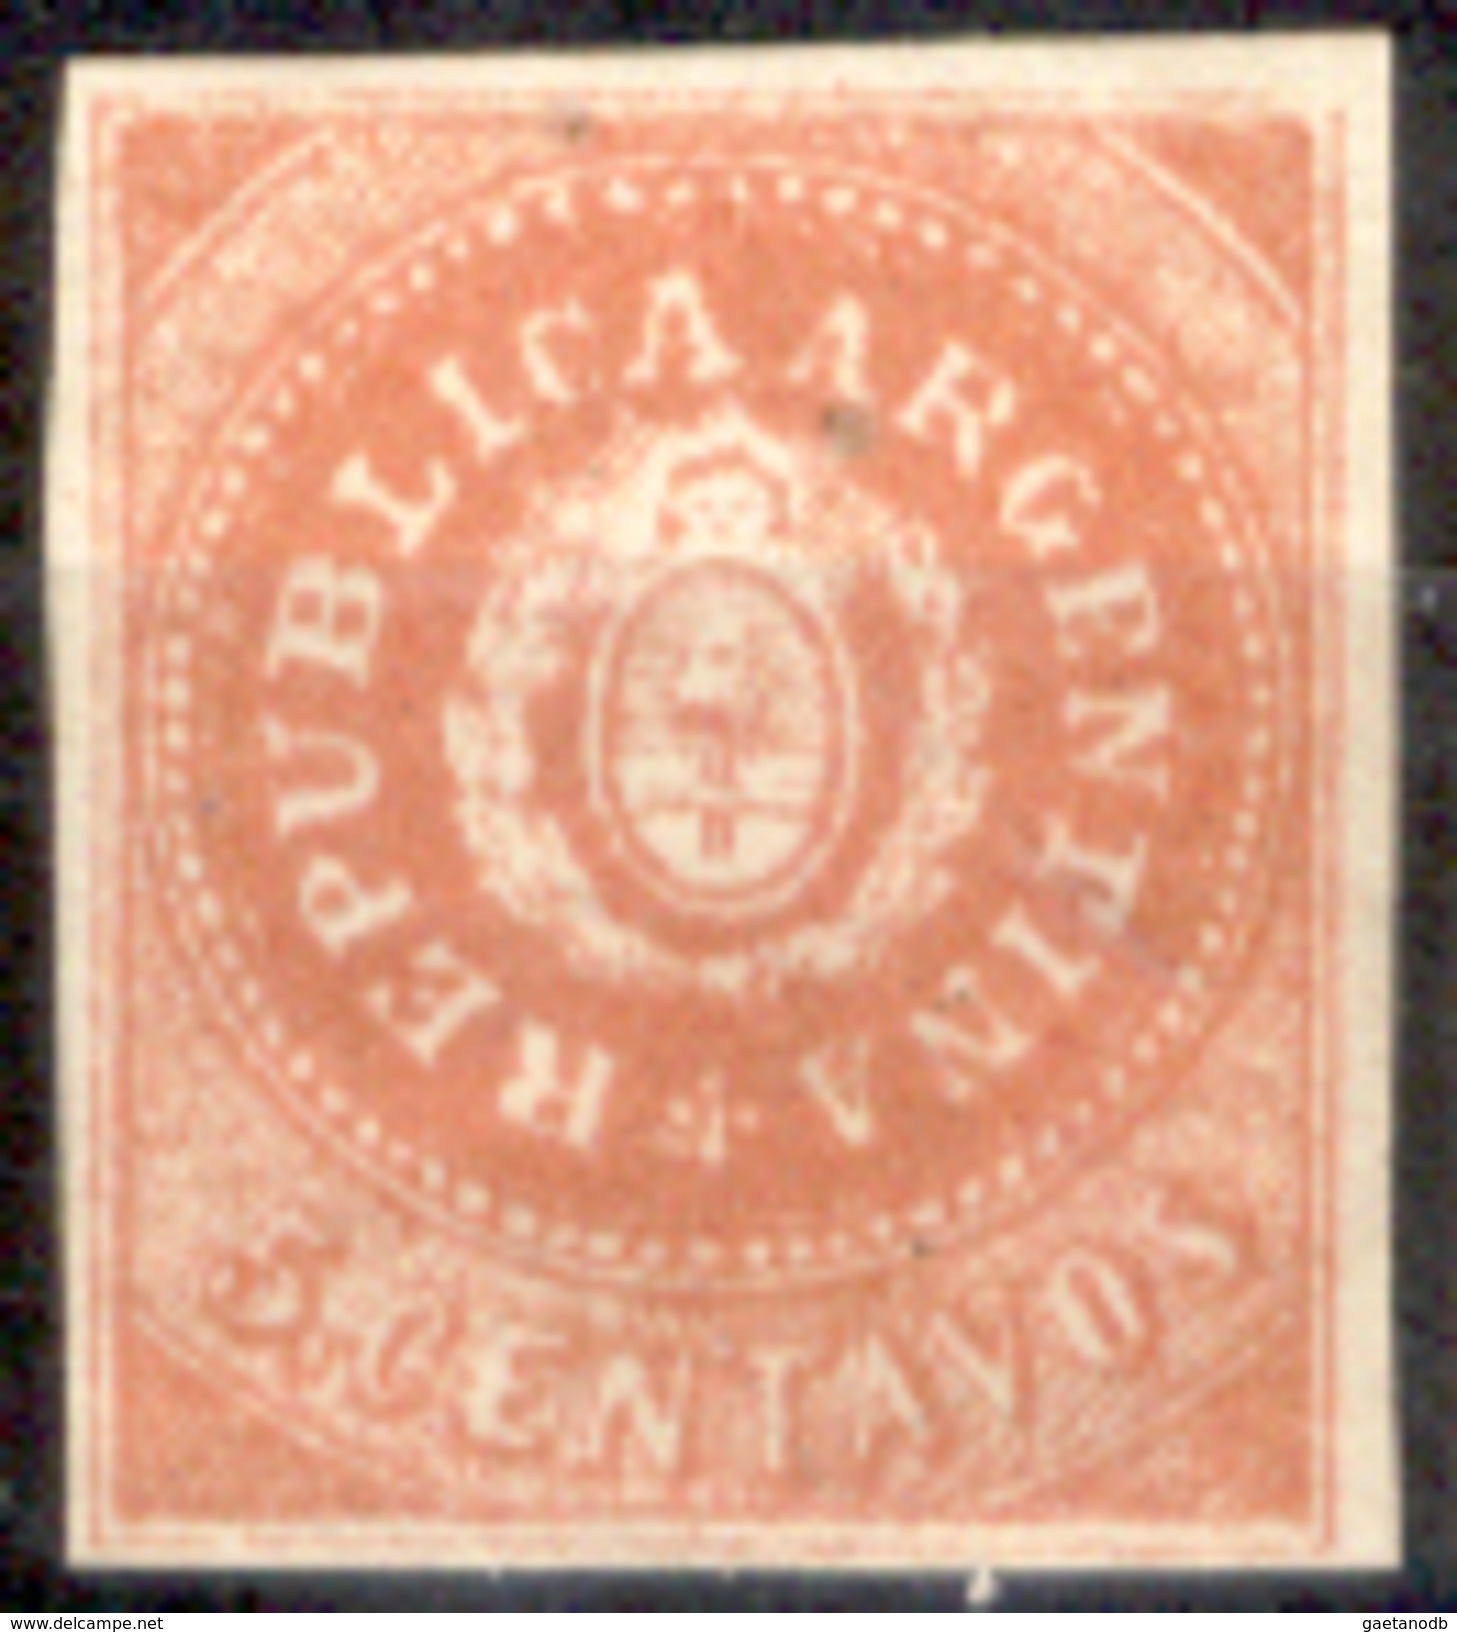 Argentina-00001a - 1862 - Yvert & Tellier N. 5g (sg) NG - Privo Di Difetti Occulti. - Unused Stamps